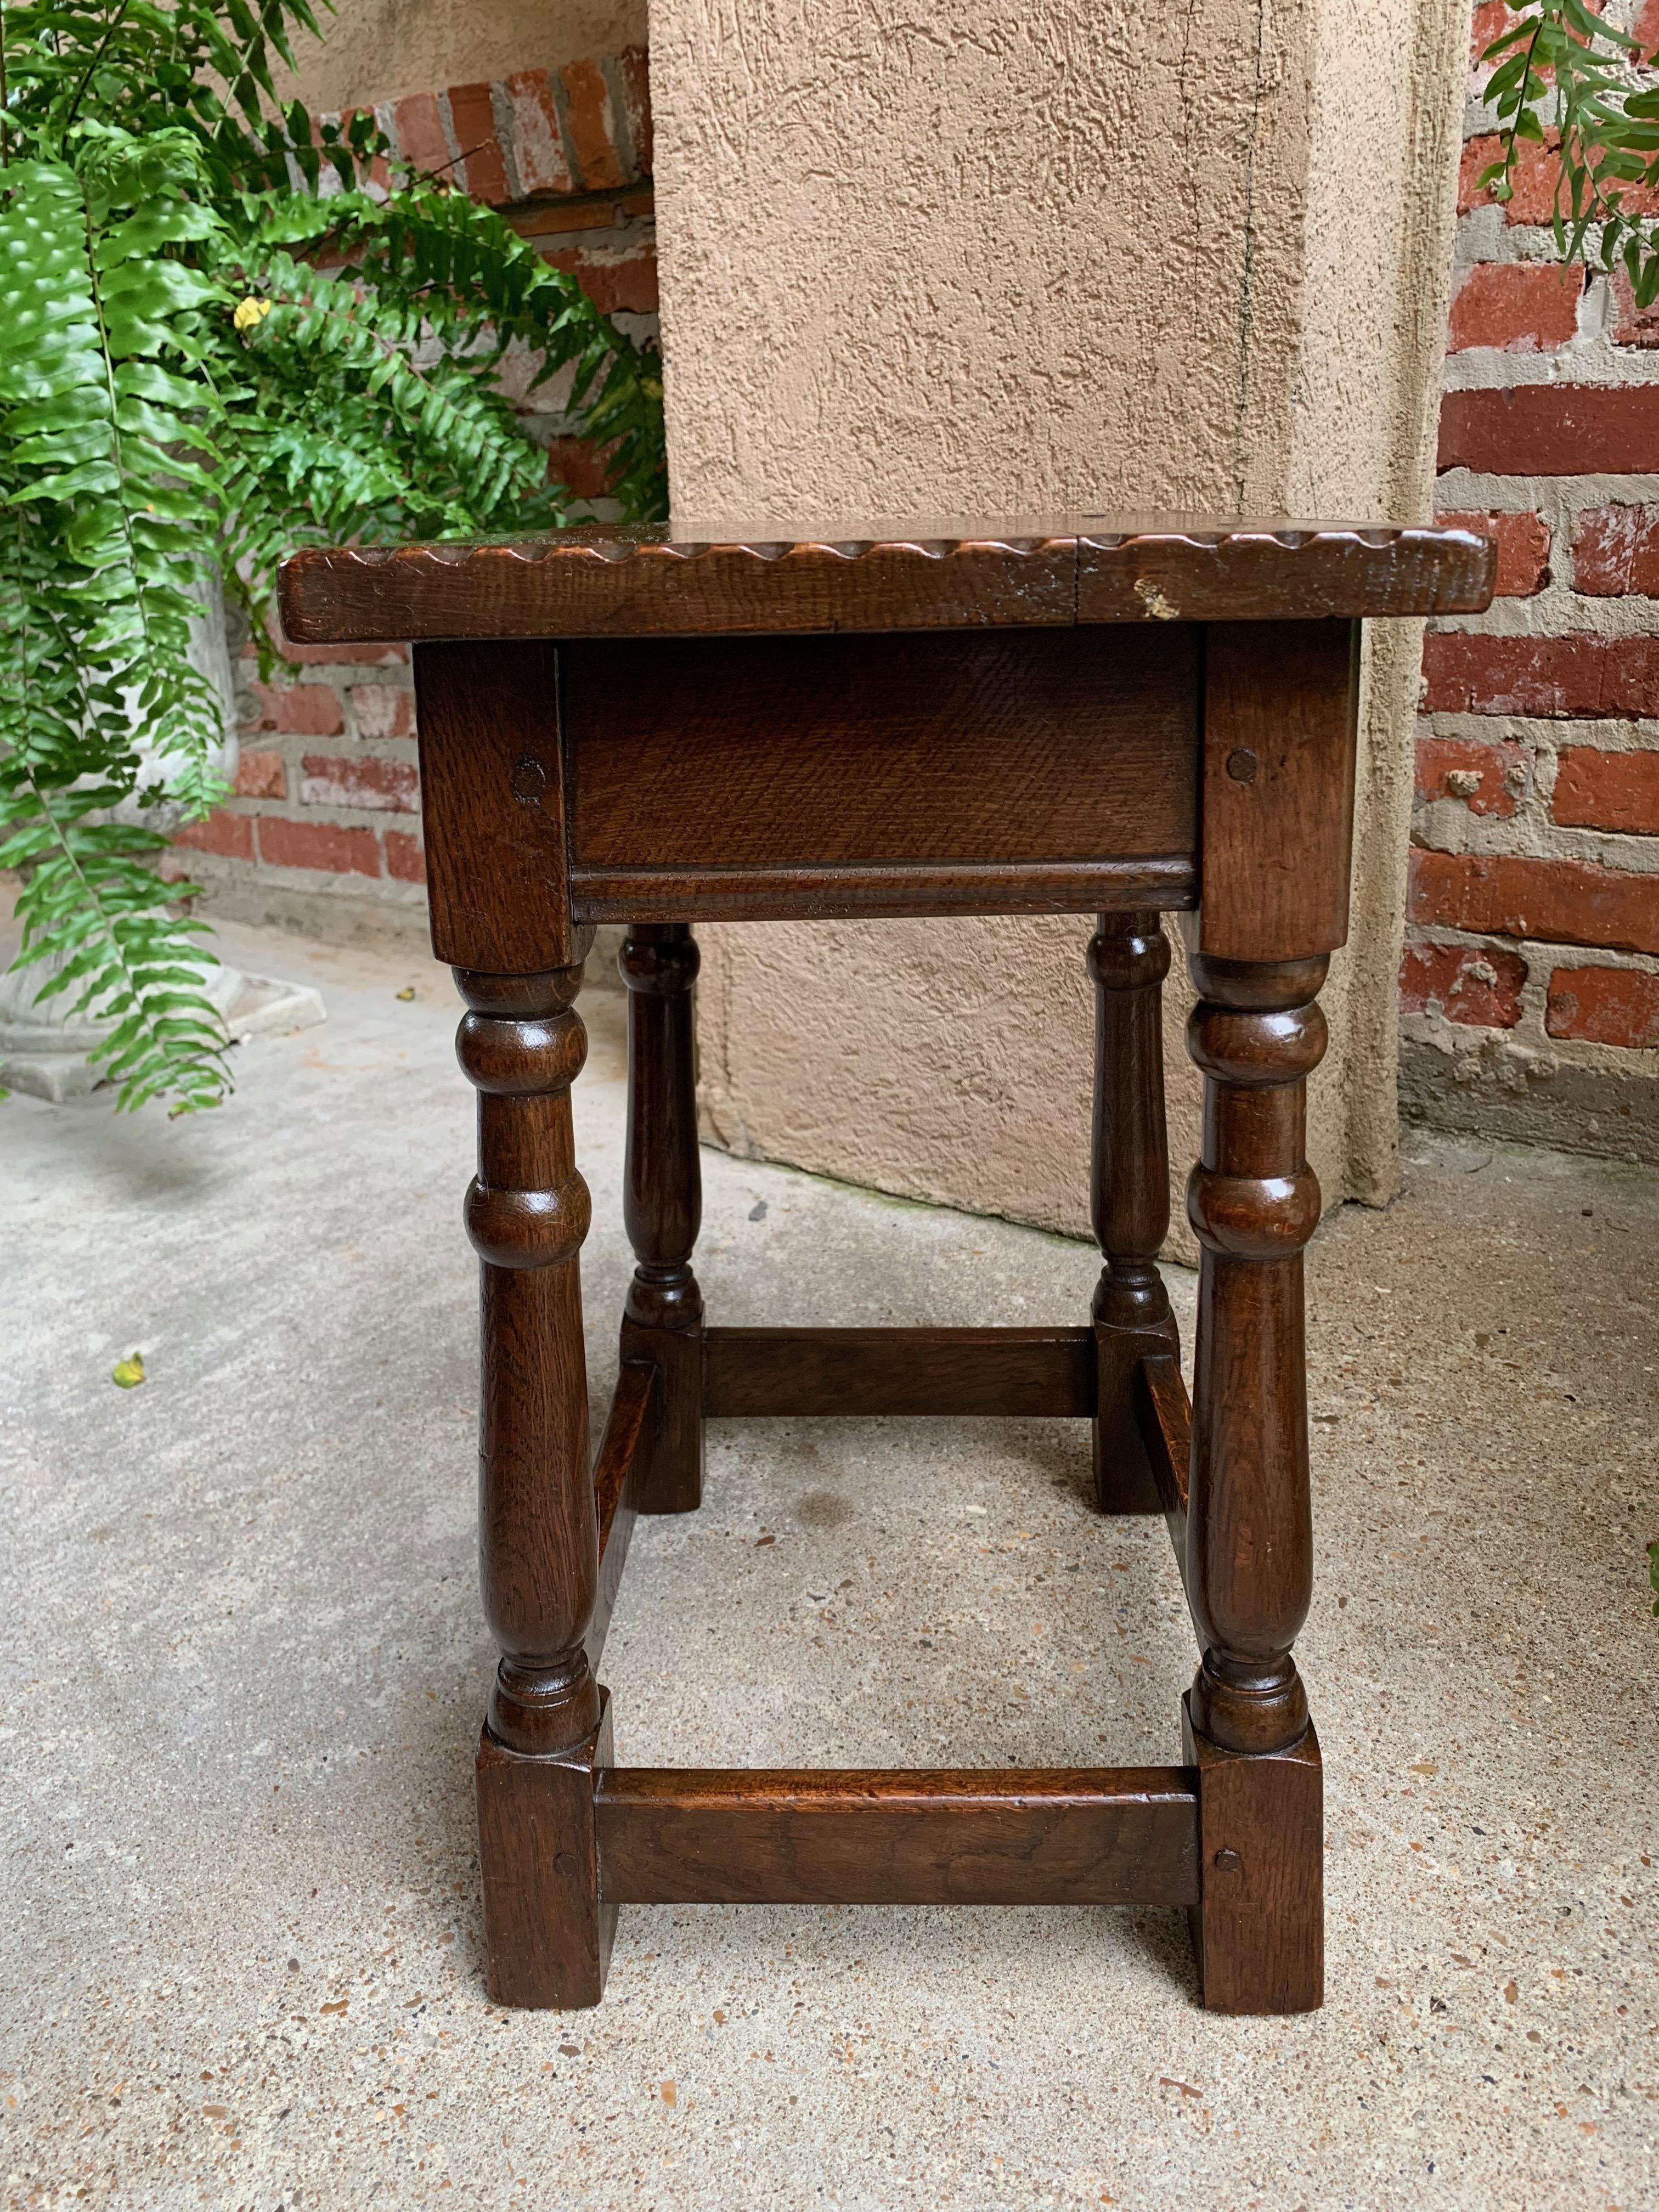 Early 20th Century Antique English Carved Tiger Oak Joint Stool Bench Table Splayed Leg c1900